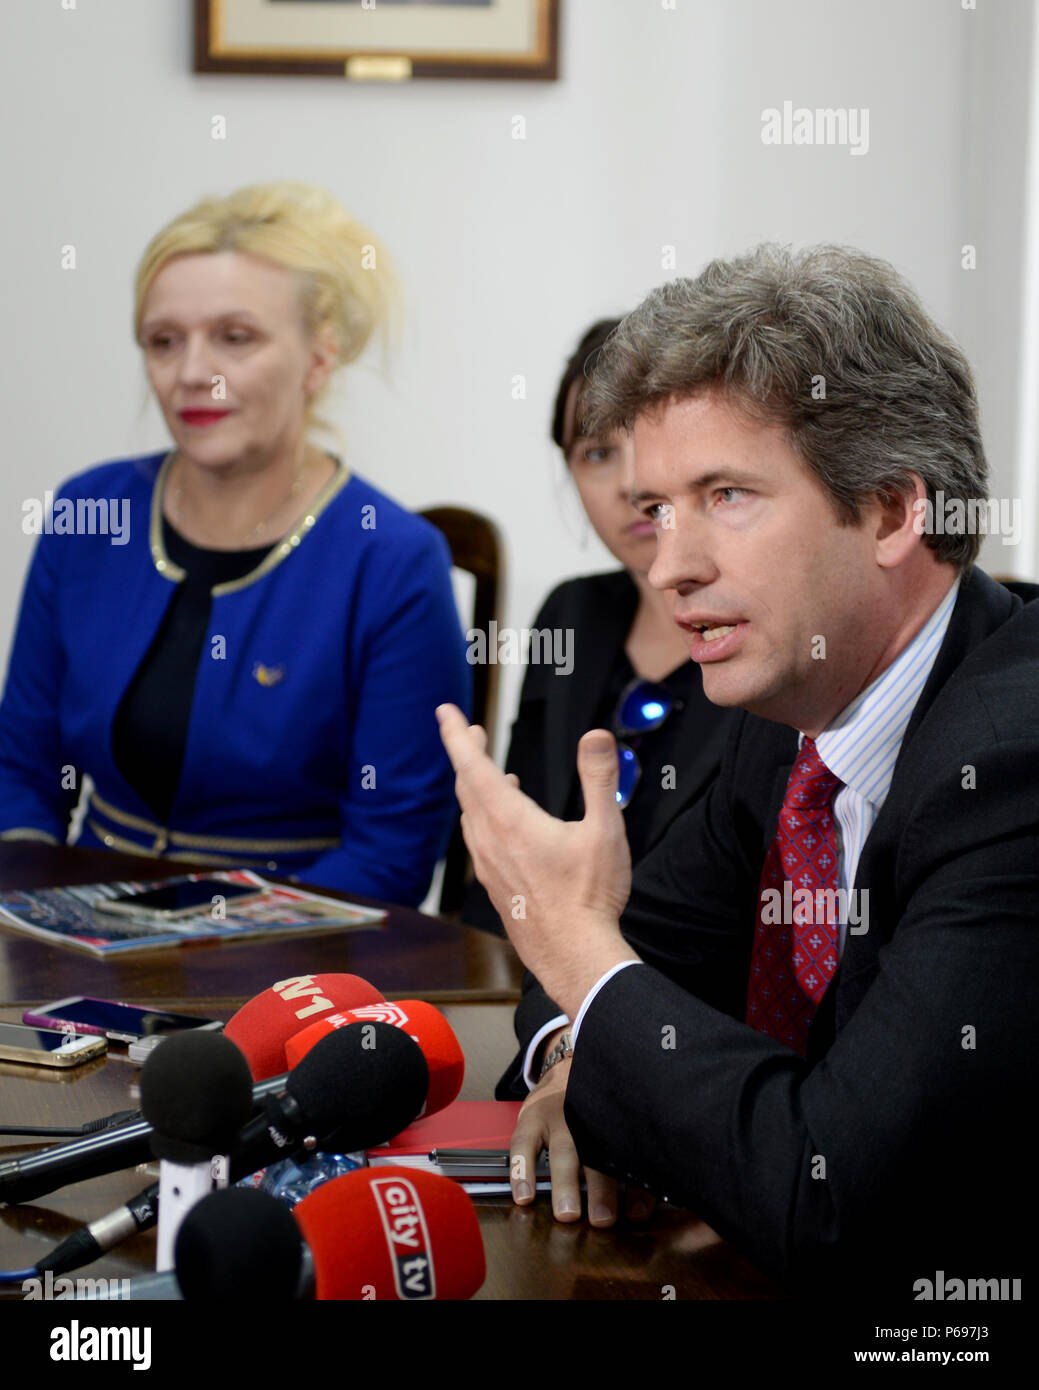 Edward Ferguson, the British Ambassador to BiH, addresses reporters during a press conference at the Džemal Bijedić University in Mostar, Bosnia and Herzegovina, May 23, 2016. The ambassador and Brig. Gen. Giselle Wilz, NATO Headquarters Sarajevo commander, gave a lecture to more than 100 students at the university on the political aspects of the Euro-Atlantic integration and the importance of NATO as well as successes of BiH armed forces in regards to defense reform. After their presentations, the key NATO leaders in BiH engaged in a lively dialogue with students and professors, giving valuab Stock Photo